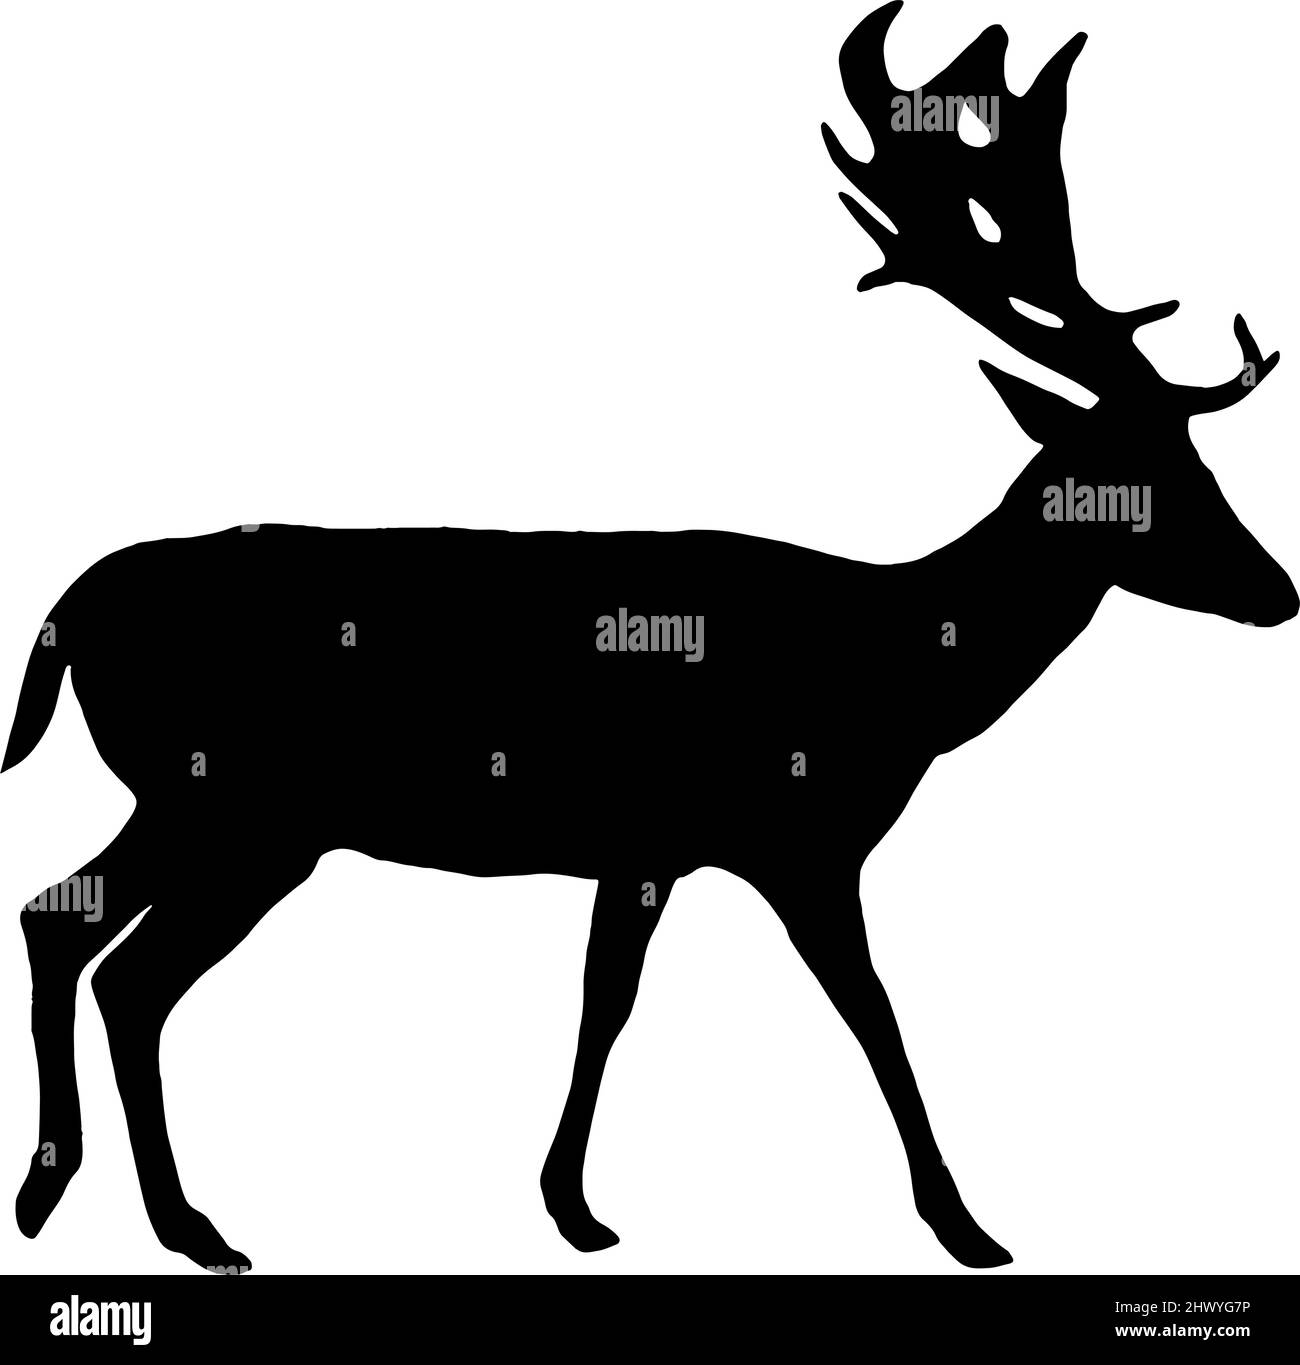 Deer with antlers silhouette in black on white background Stock Vector